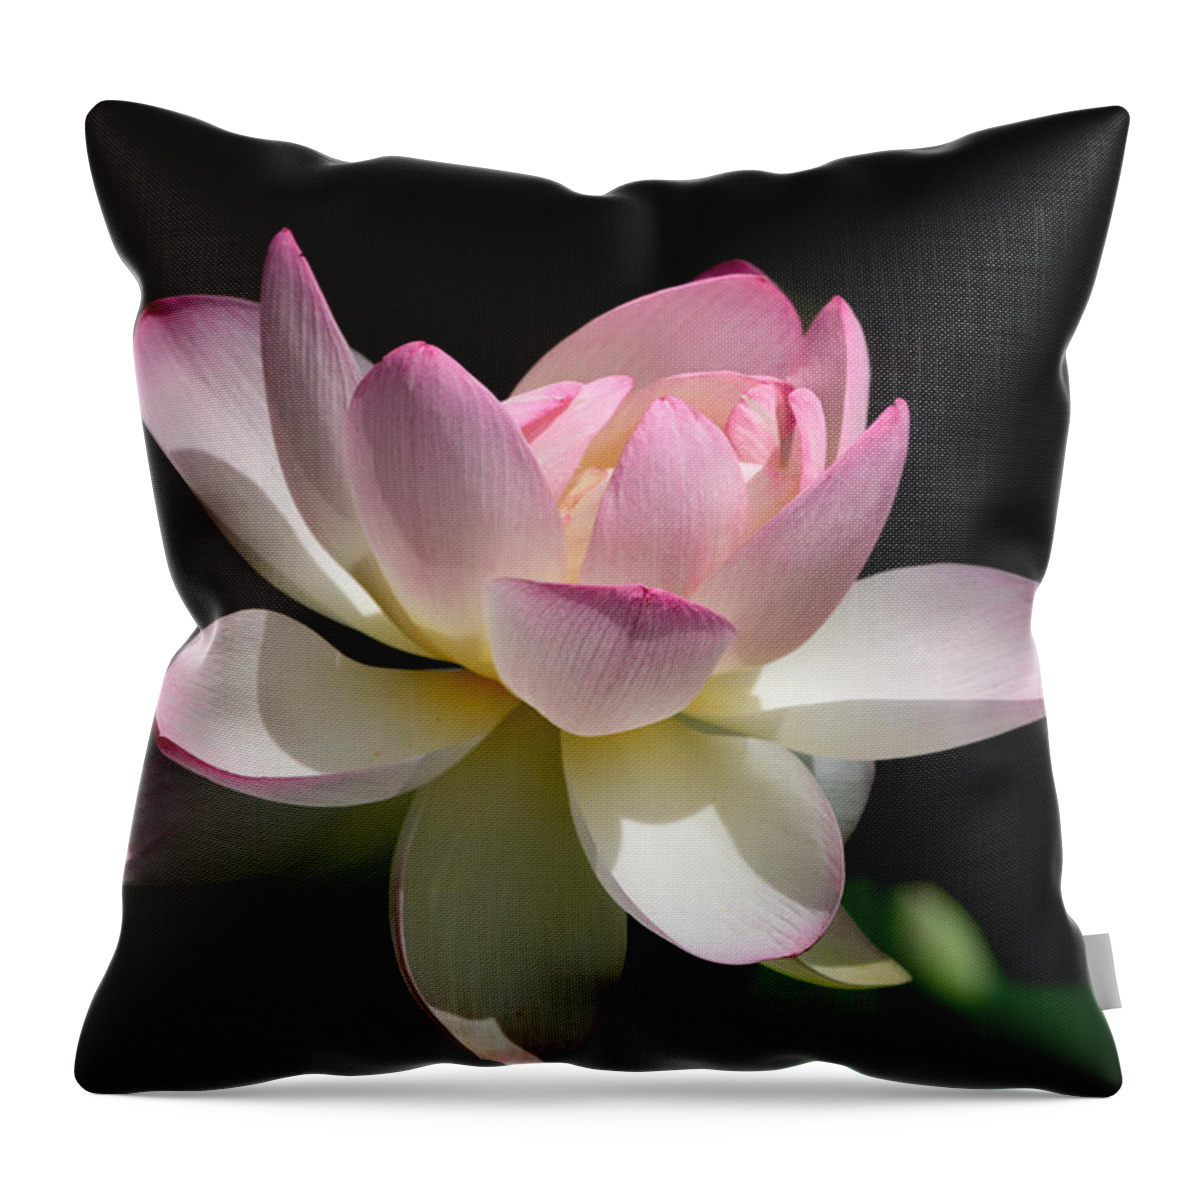 Lotus Throw Pillow featuring the photograph Not Your Average Waterlily by Linda Bonaccorsi